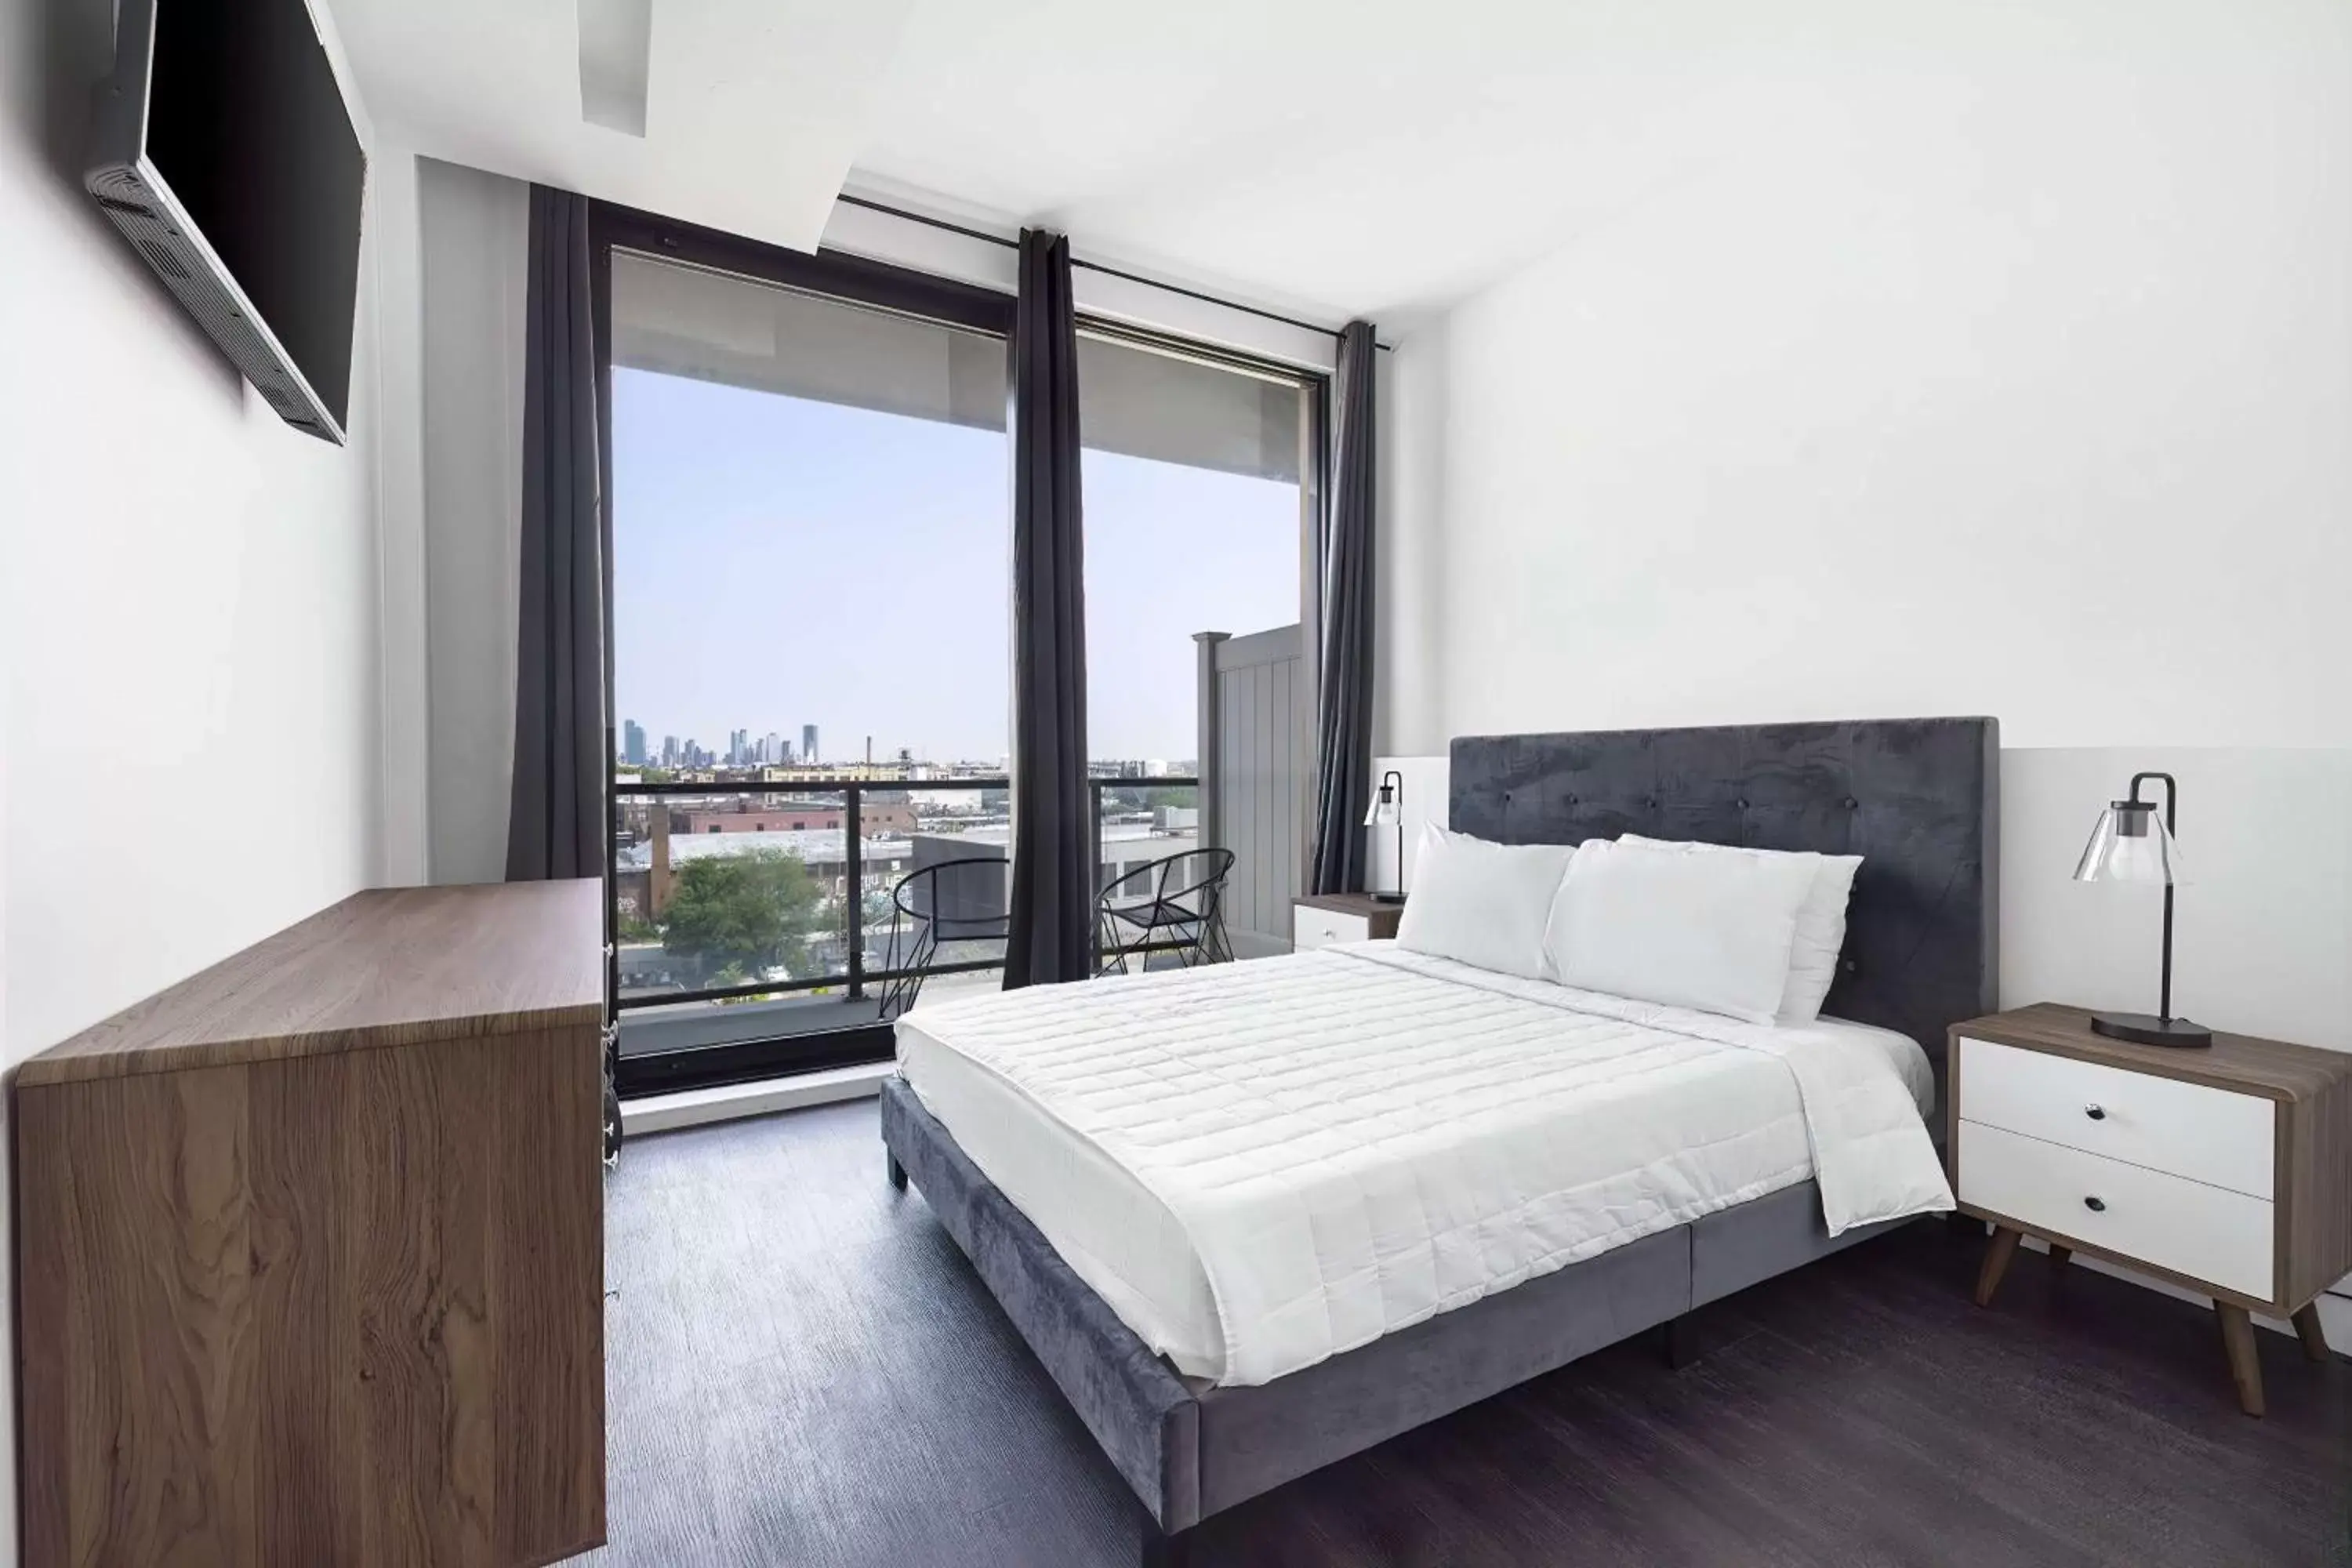 Deluxe Queen Room with City View, Non-Smoking in The Bogart by LuxUrban